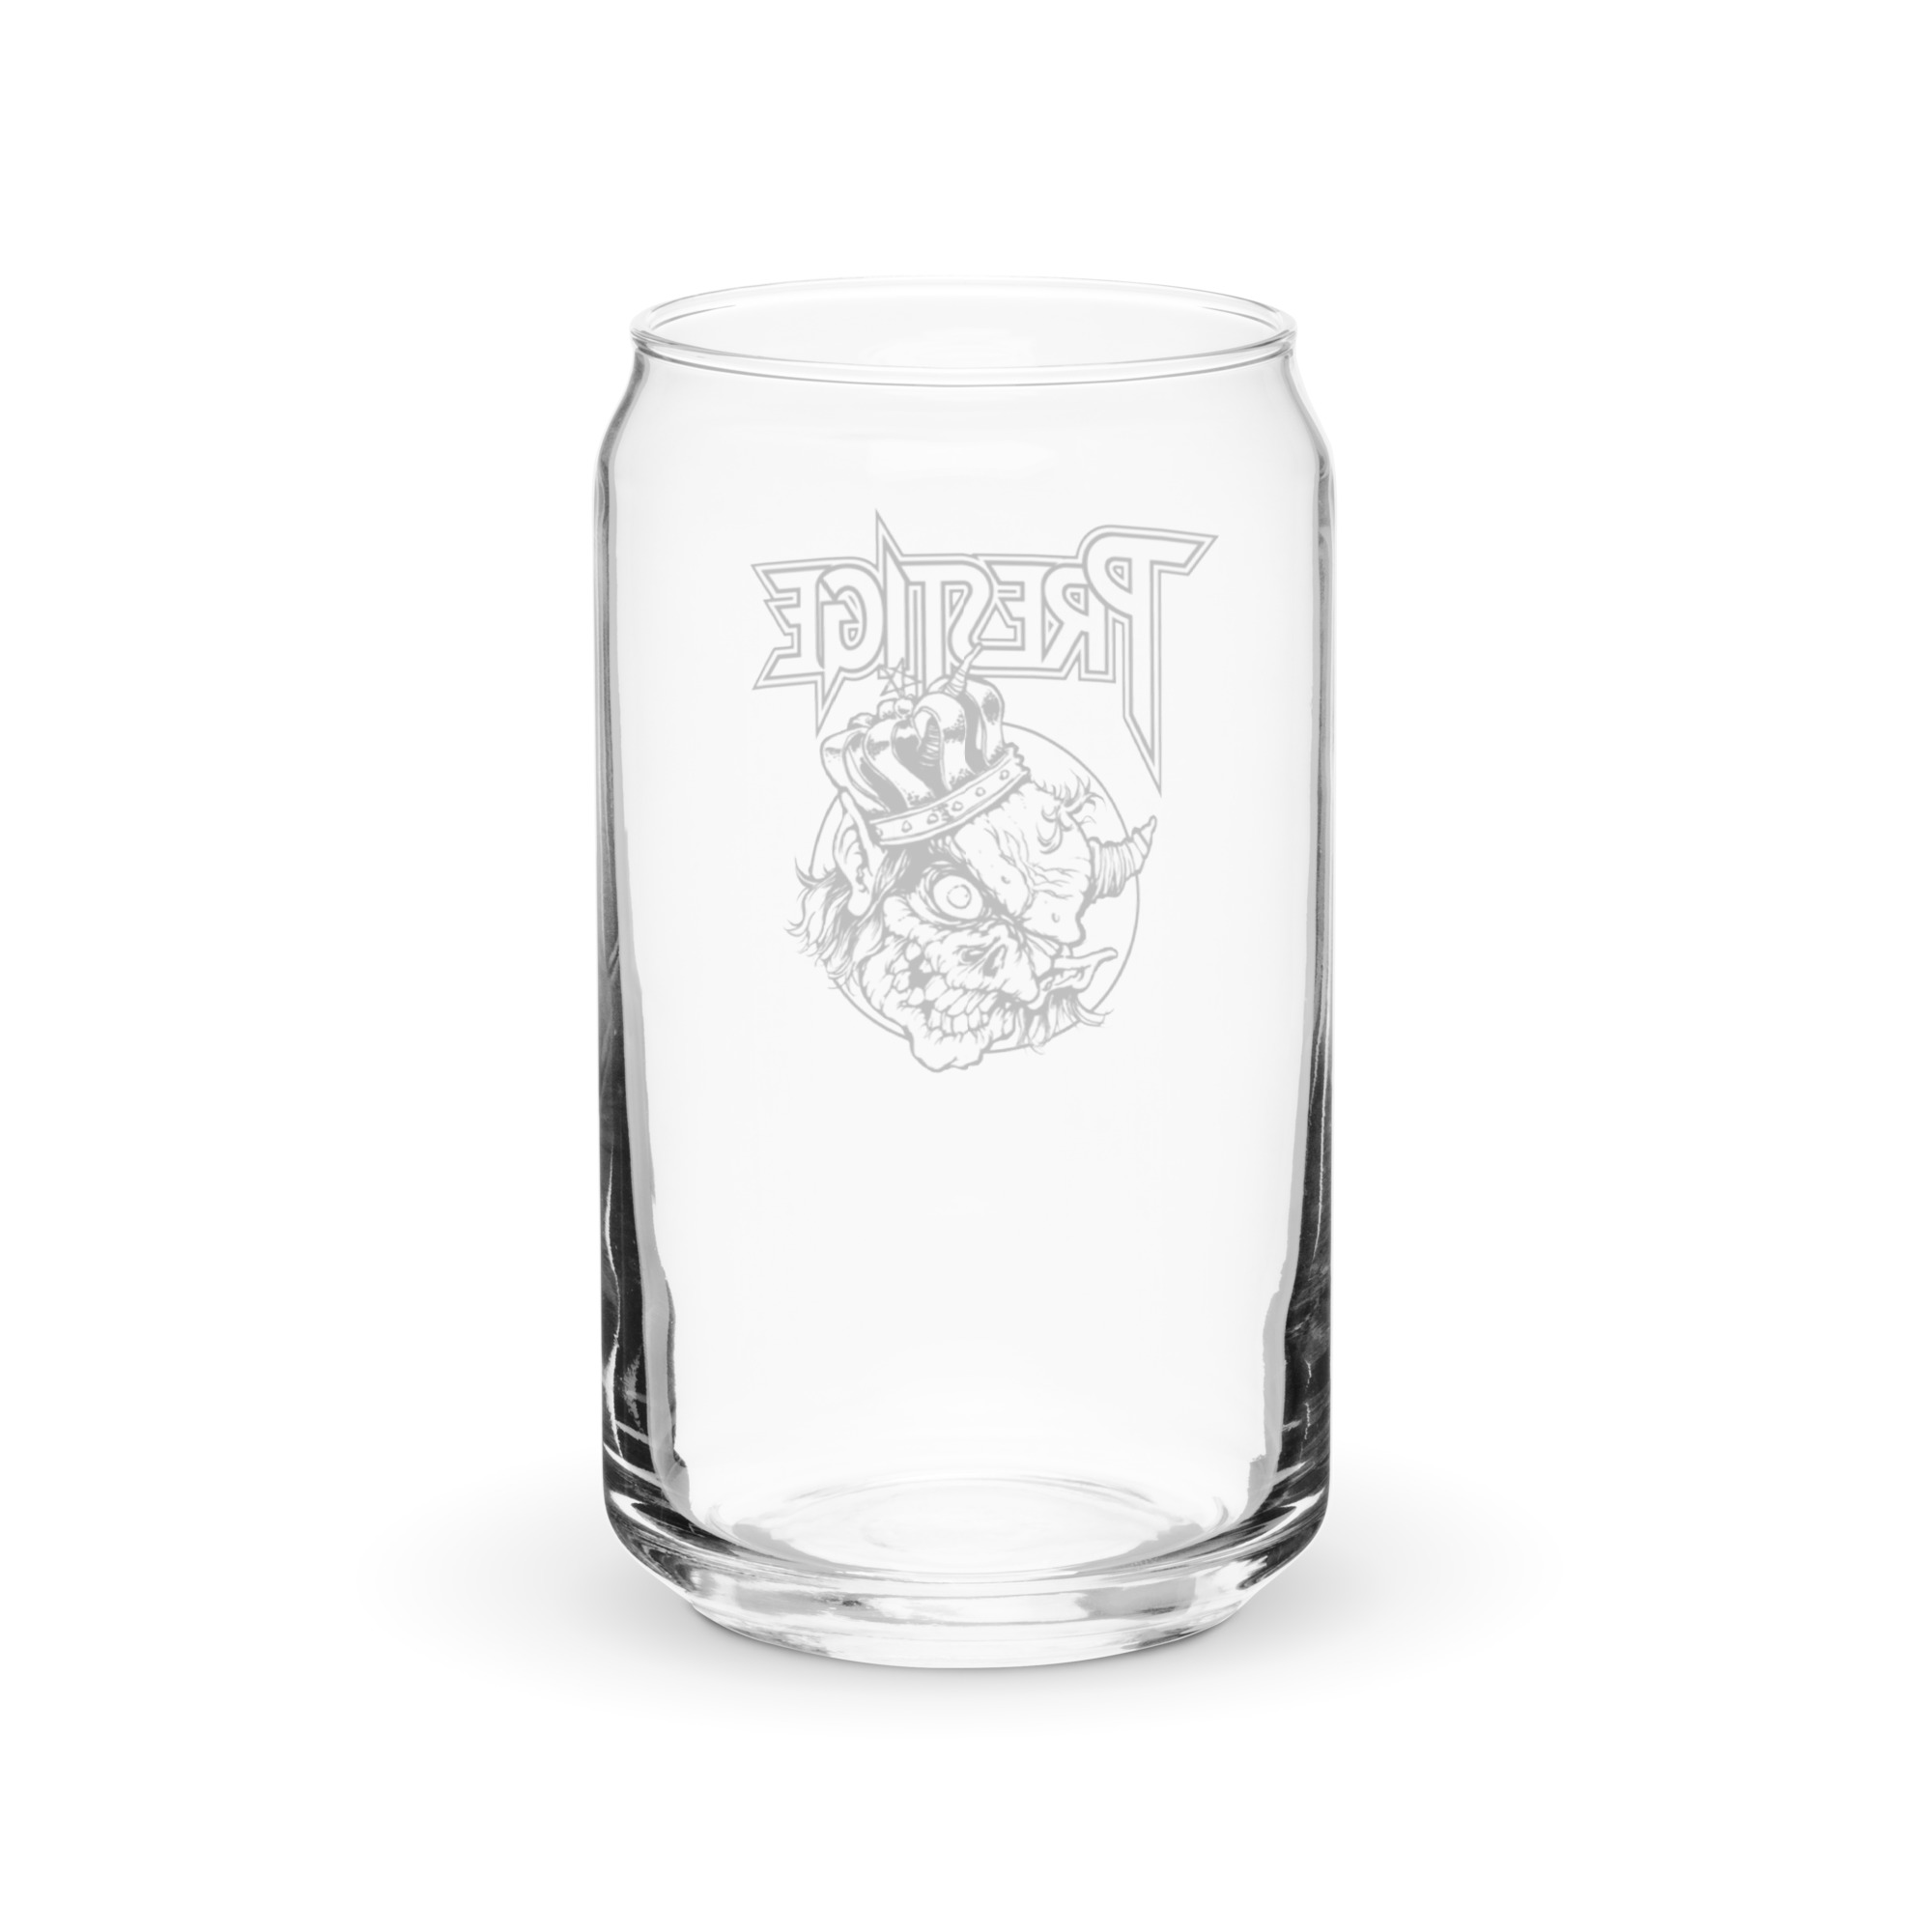 Beer can glass!